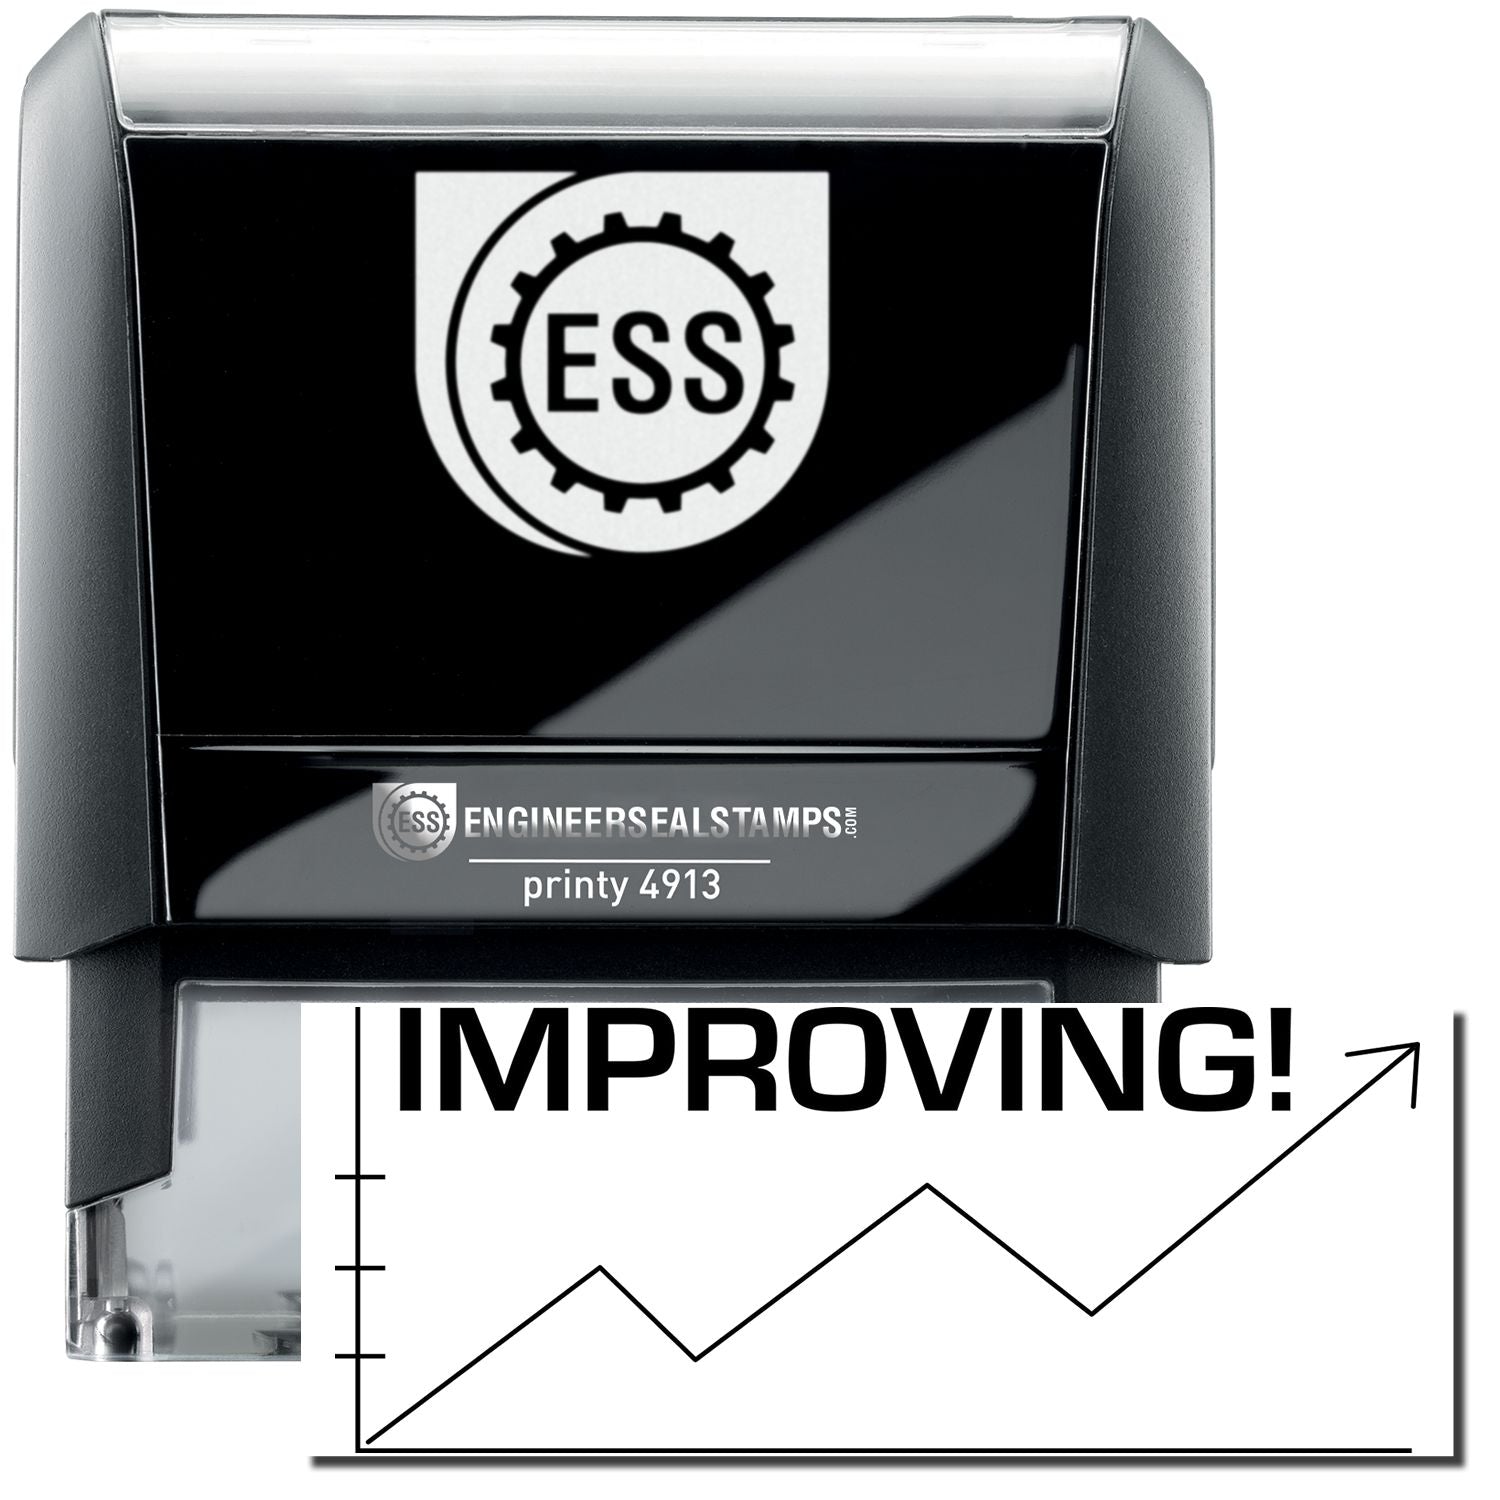 A self-inking stamp with a stamped image showing how the text "IMPROVING!" in a large font with an image of a chart below that shows an arrow moving up, down, and back up again is displayed after stamping.